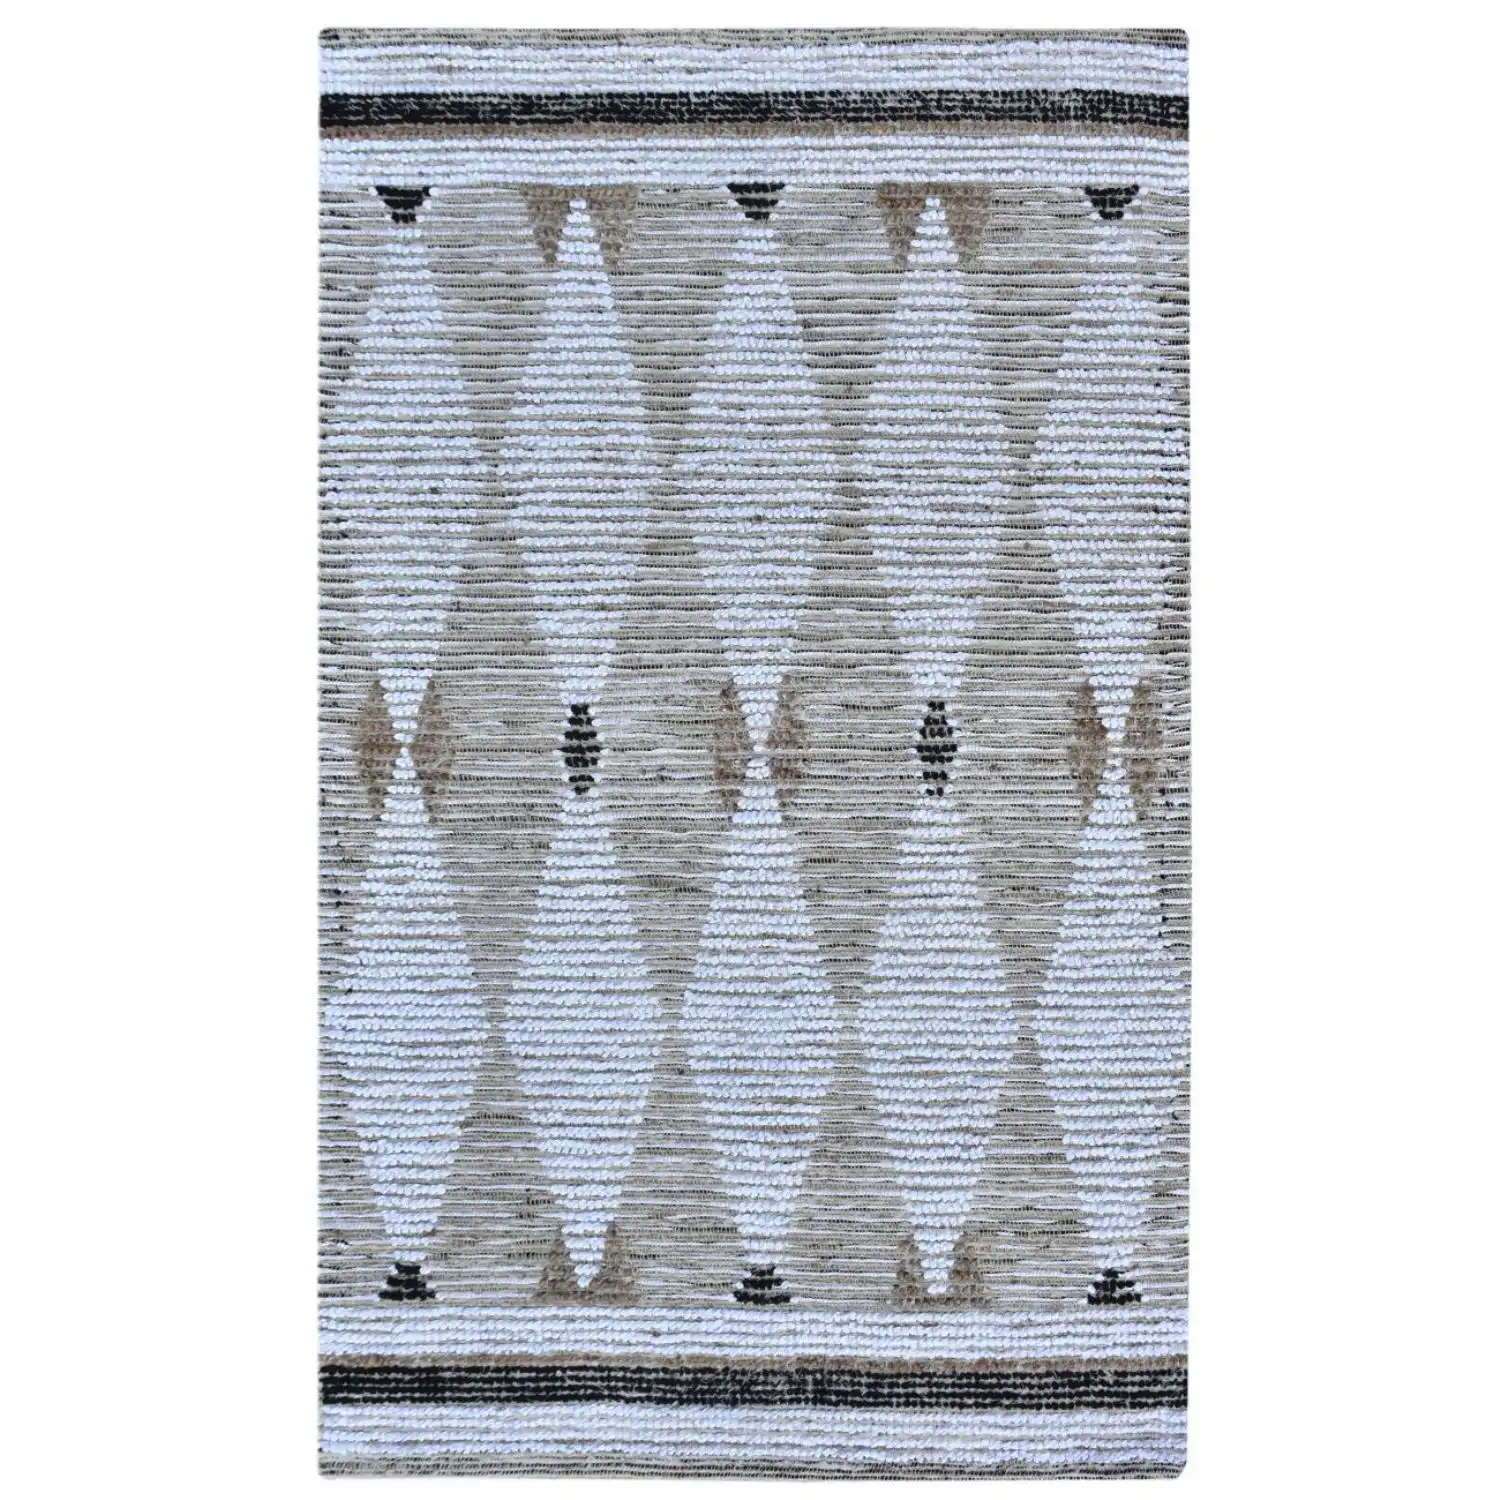 Hand Woven Ivory and Grey Jute Cotton Rug